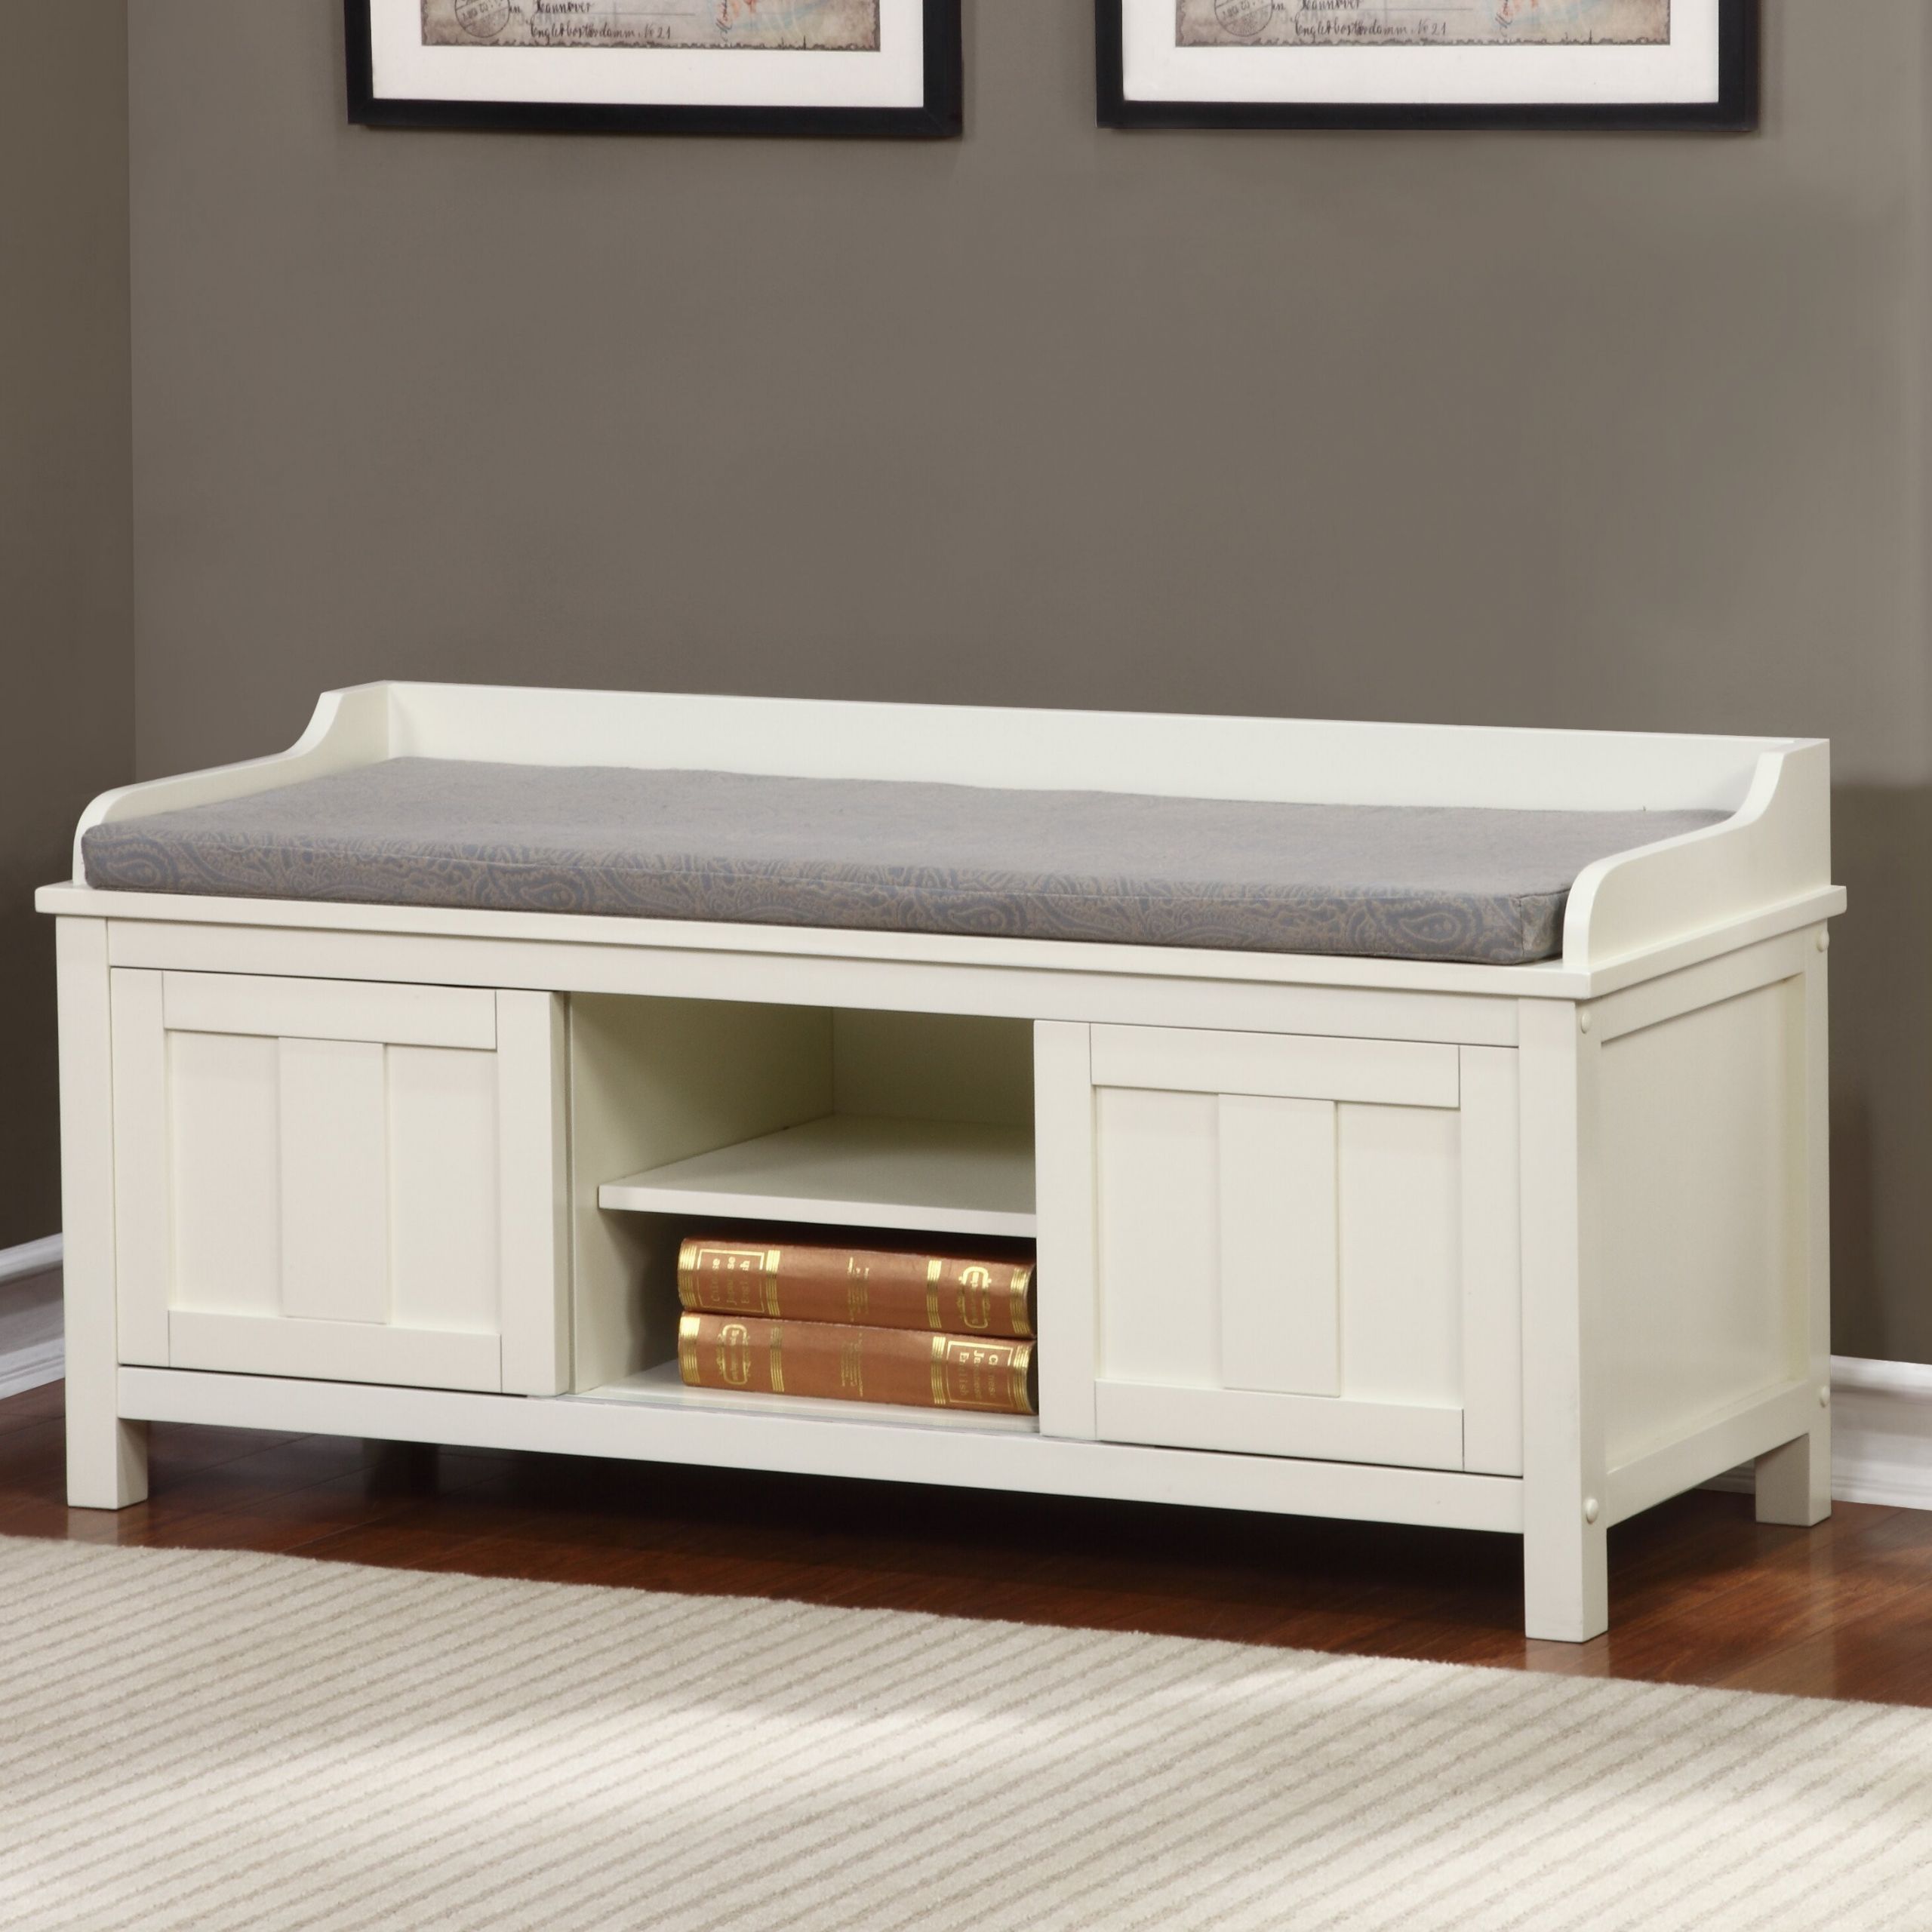 Front Entryway Storage Bench
 Breakwater Bay Maysville Wood Storage Entryway Bench